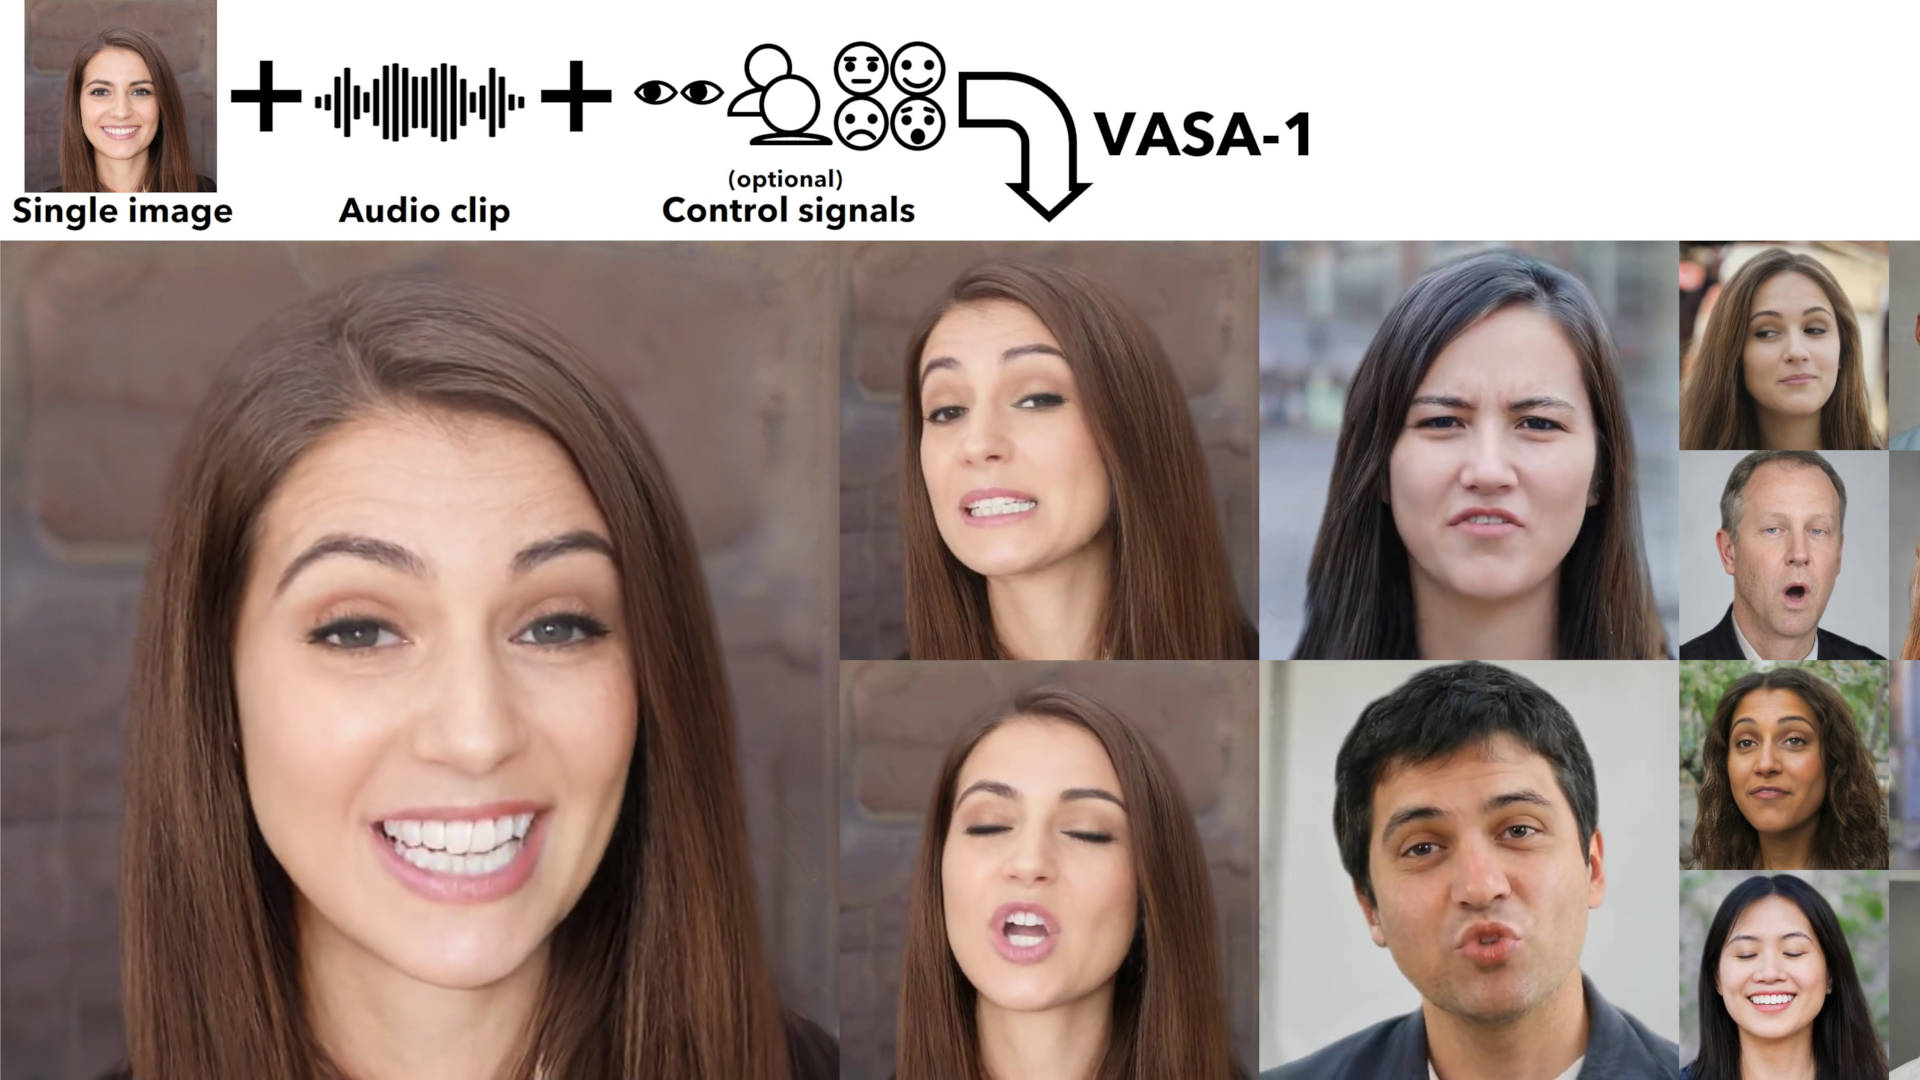  Microsoft's VASA-1 takes AI-generated video one step closer to 'aw hell, we're all doomed' 